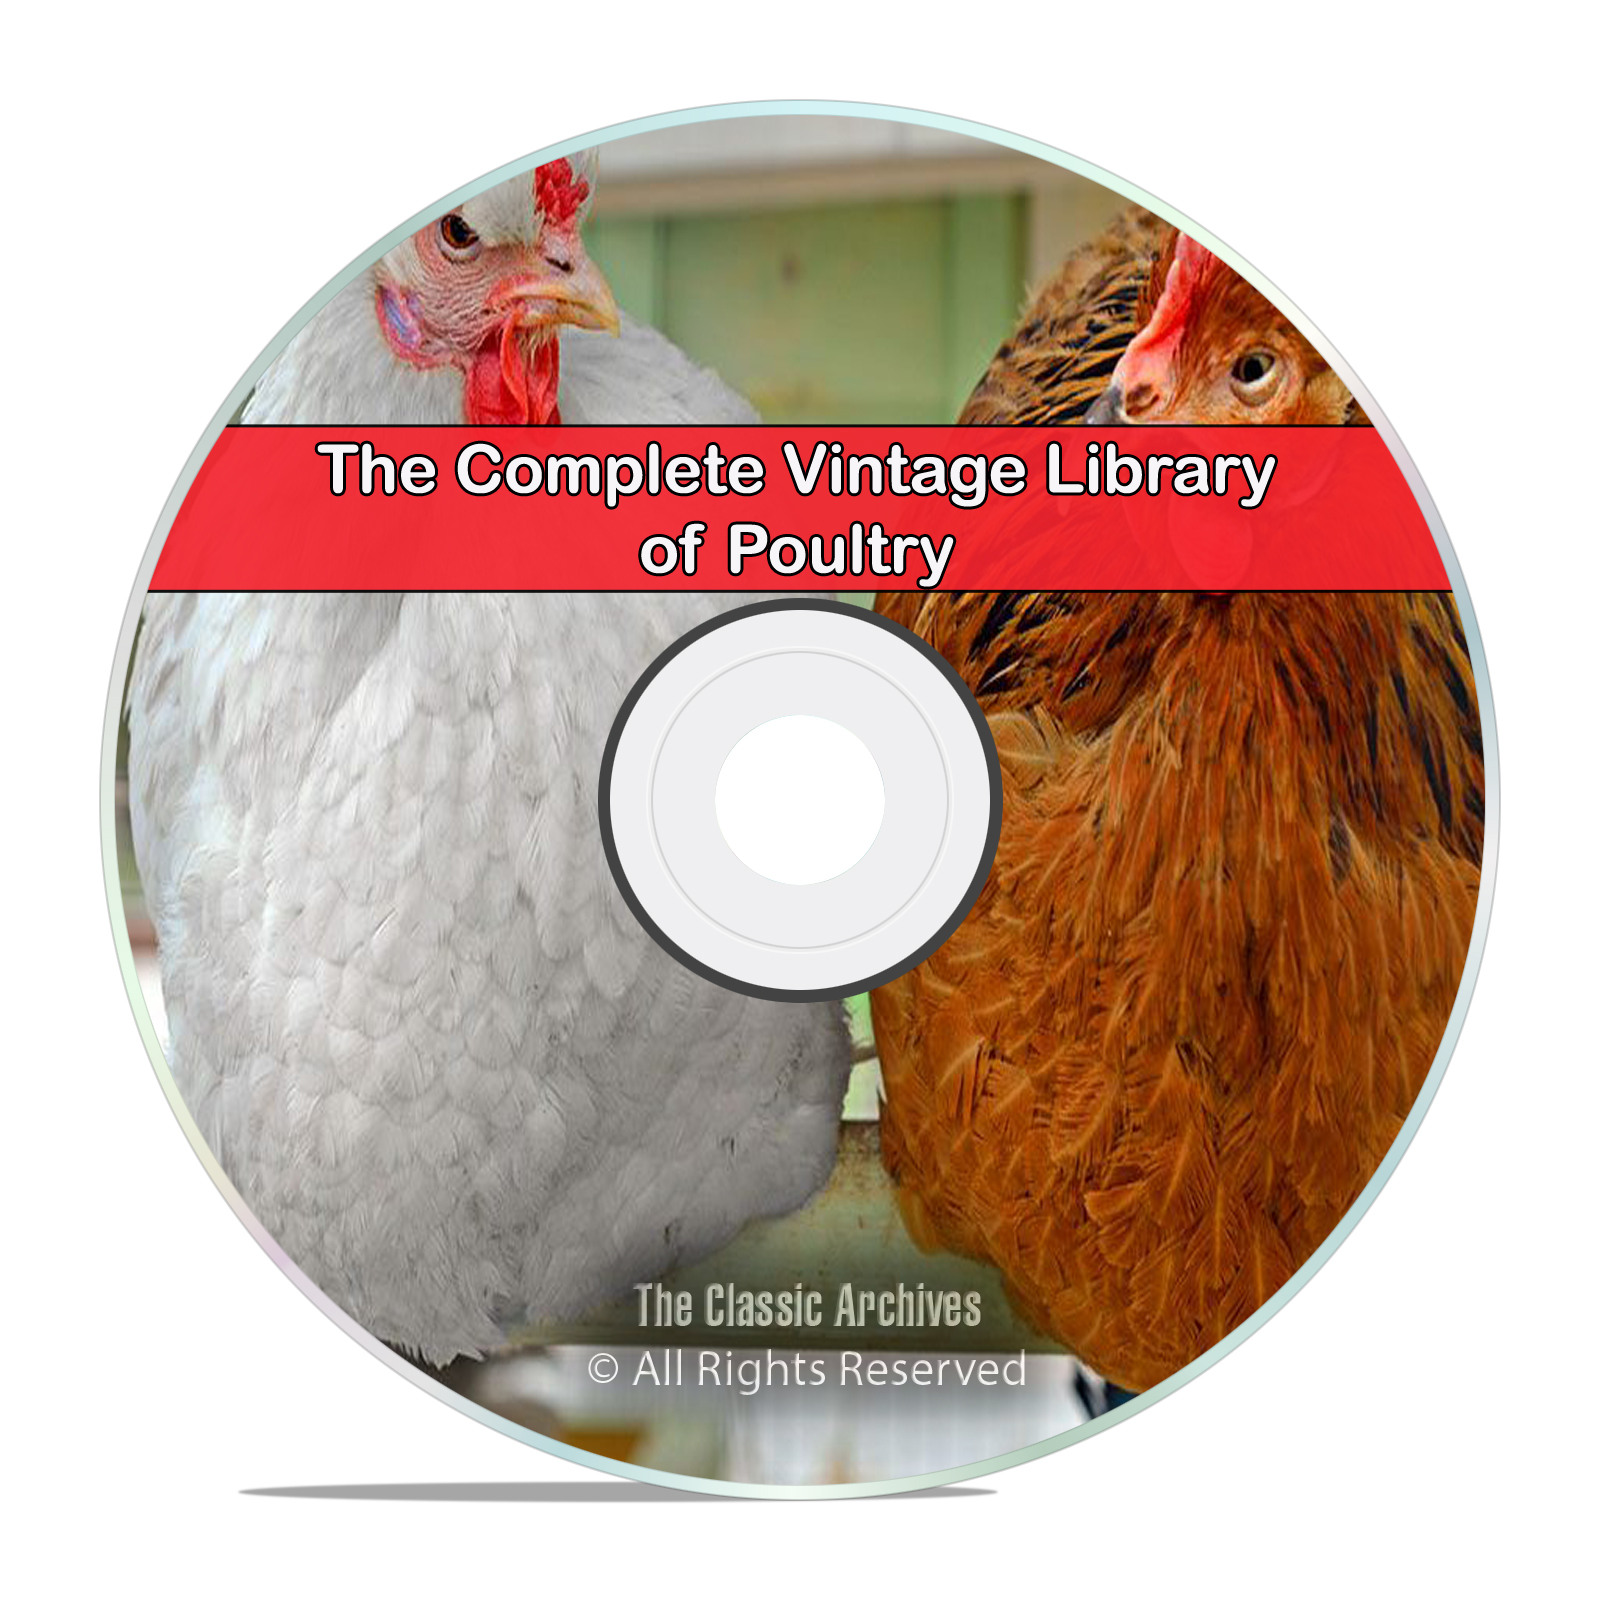 200 Books Library of Poultry, Chickens, Farming, Raise, Fowl, Squab, DVD